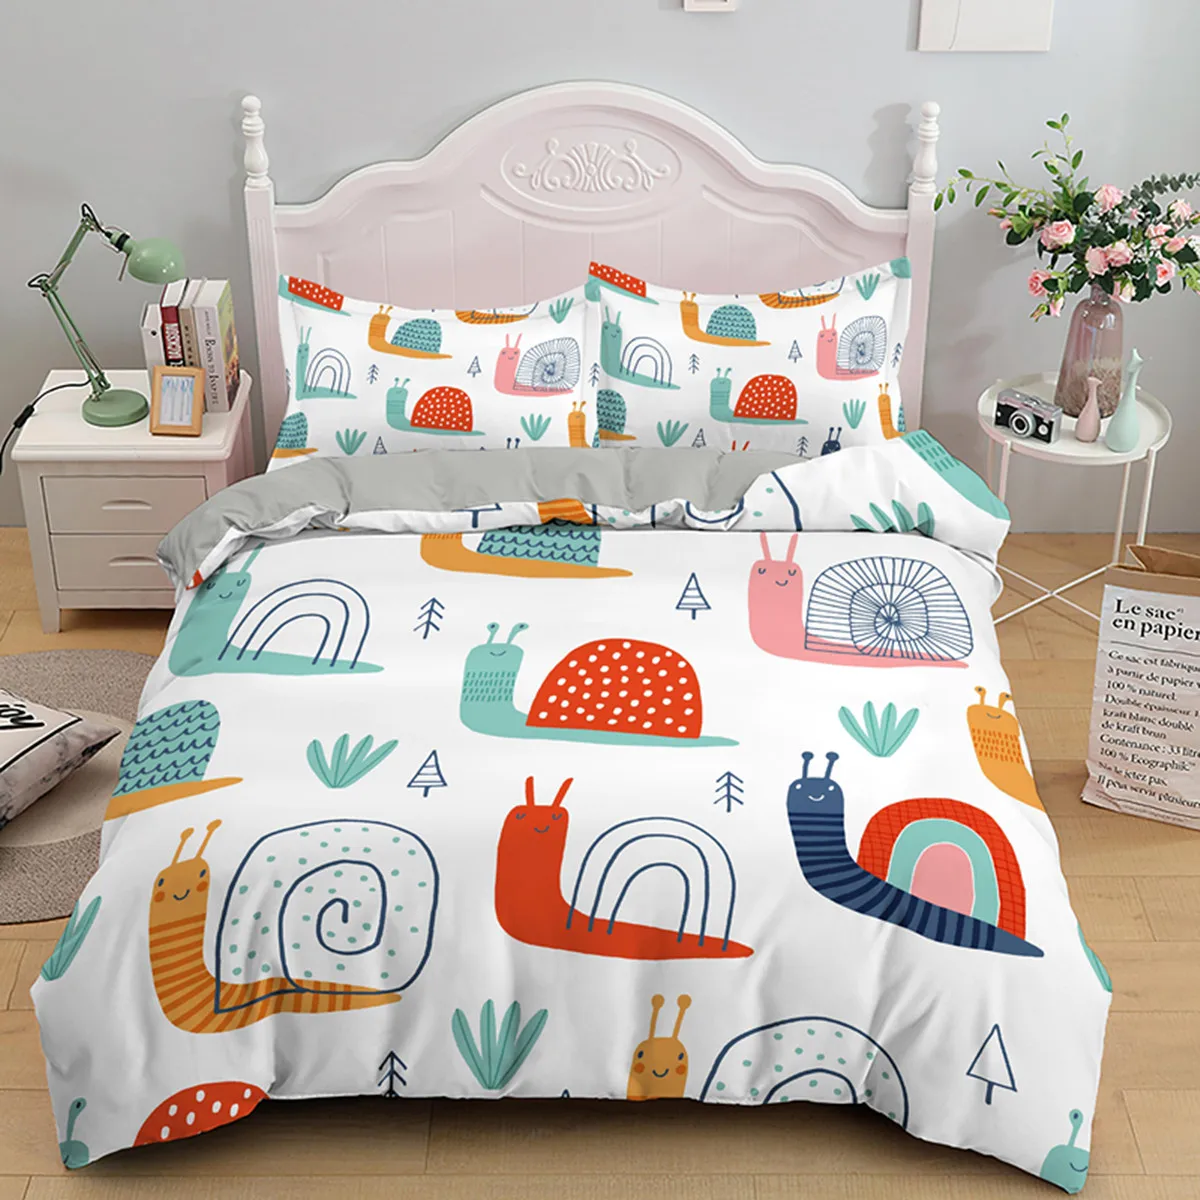 

Cartoon Snail Duvet Cover Colorful Animals for Kids Teens Women Wild Reptile Bedroom Decoration Polyester Quilt Cover Queen Size